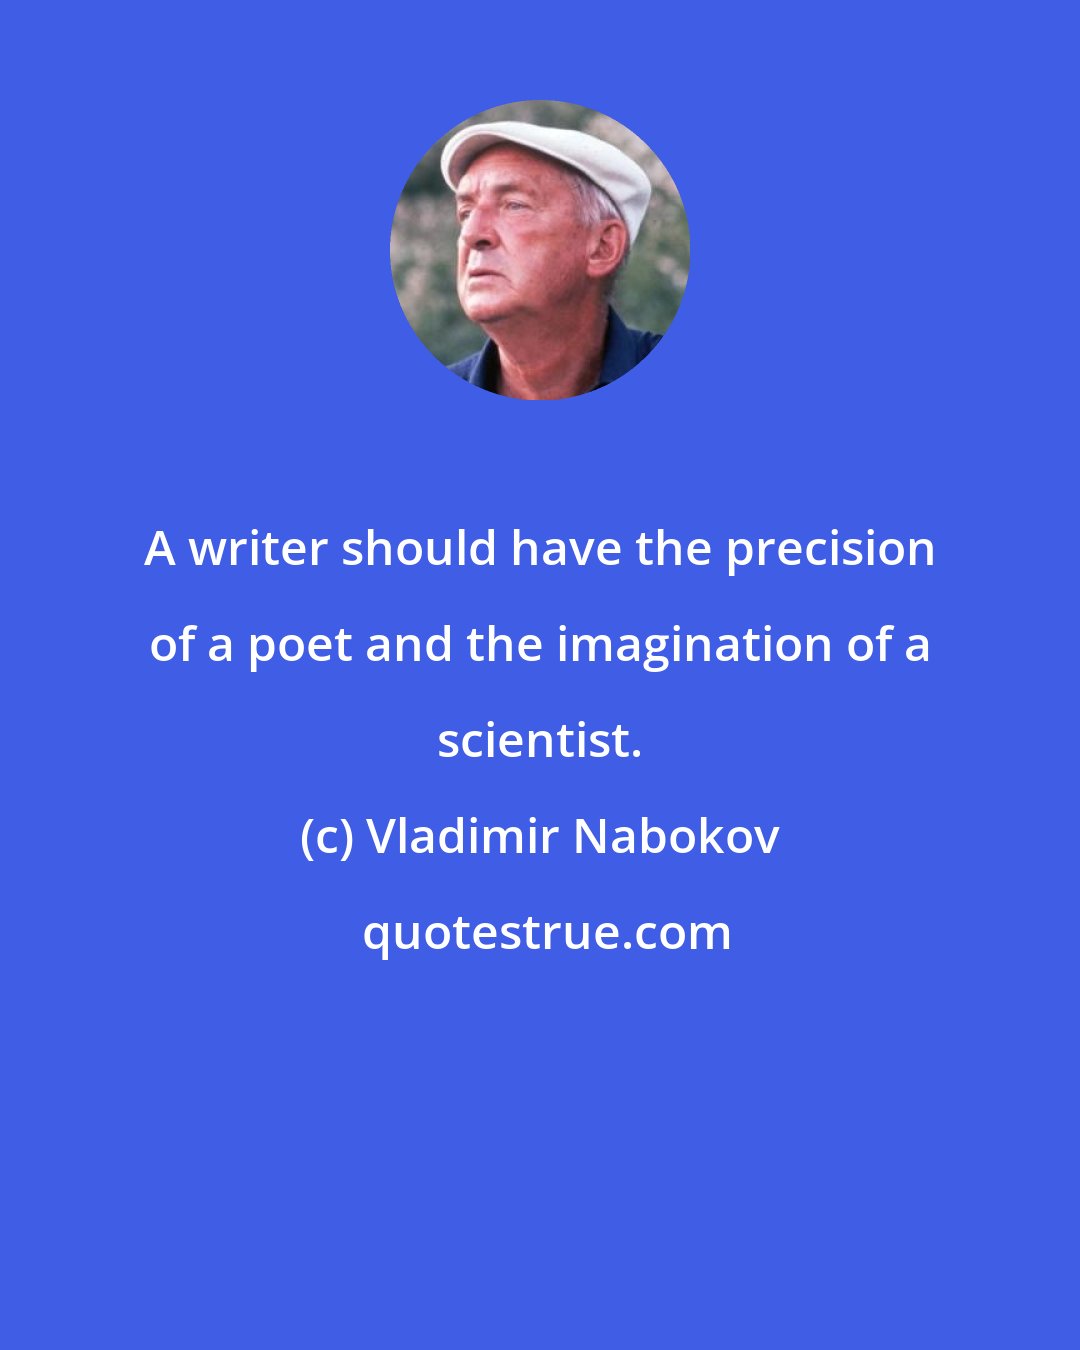 Vladimir Nabokov: A writer should have the precision of a poet and the imagination of a scientist.